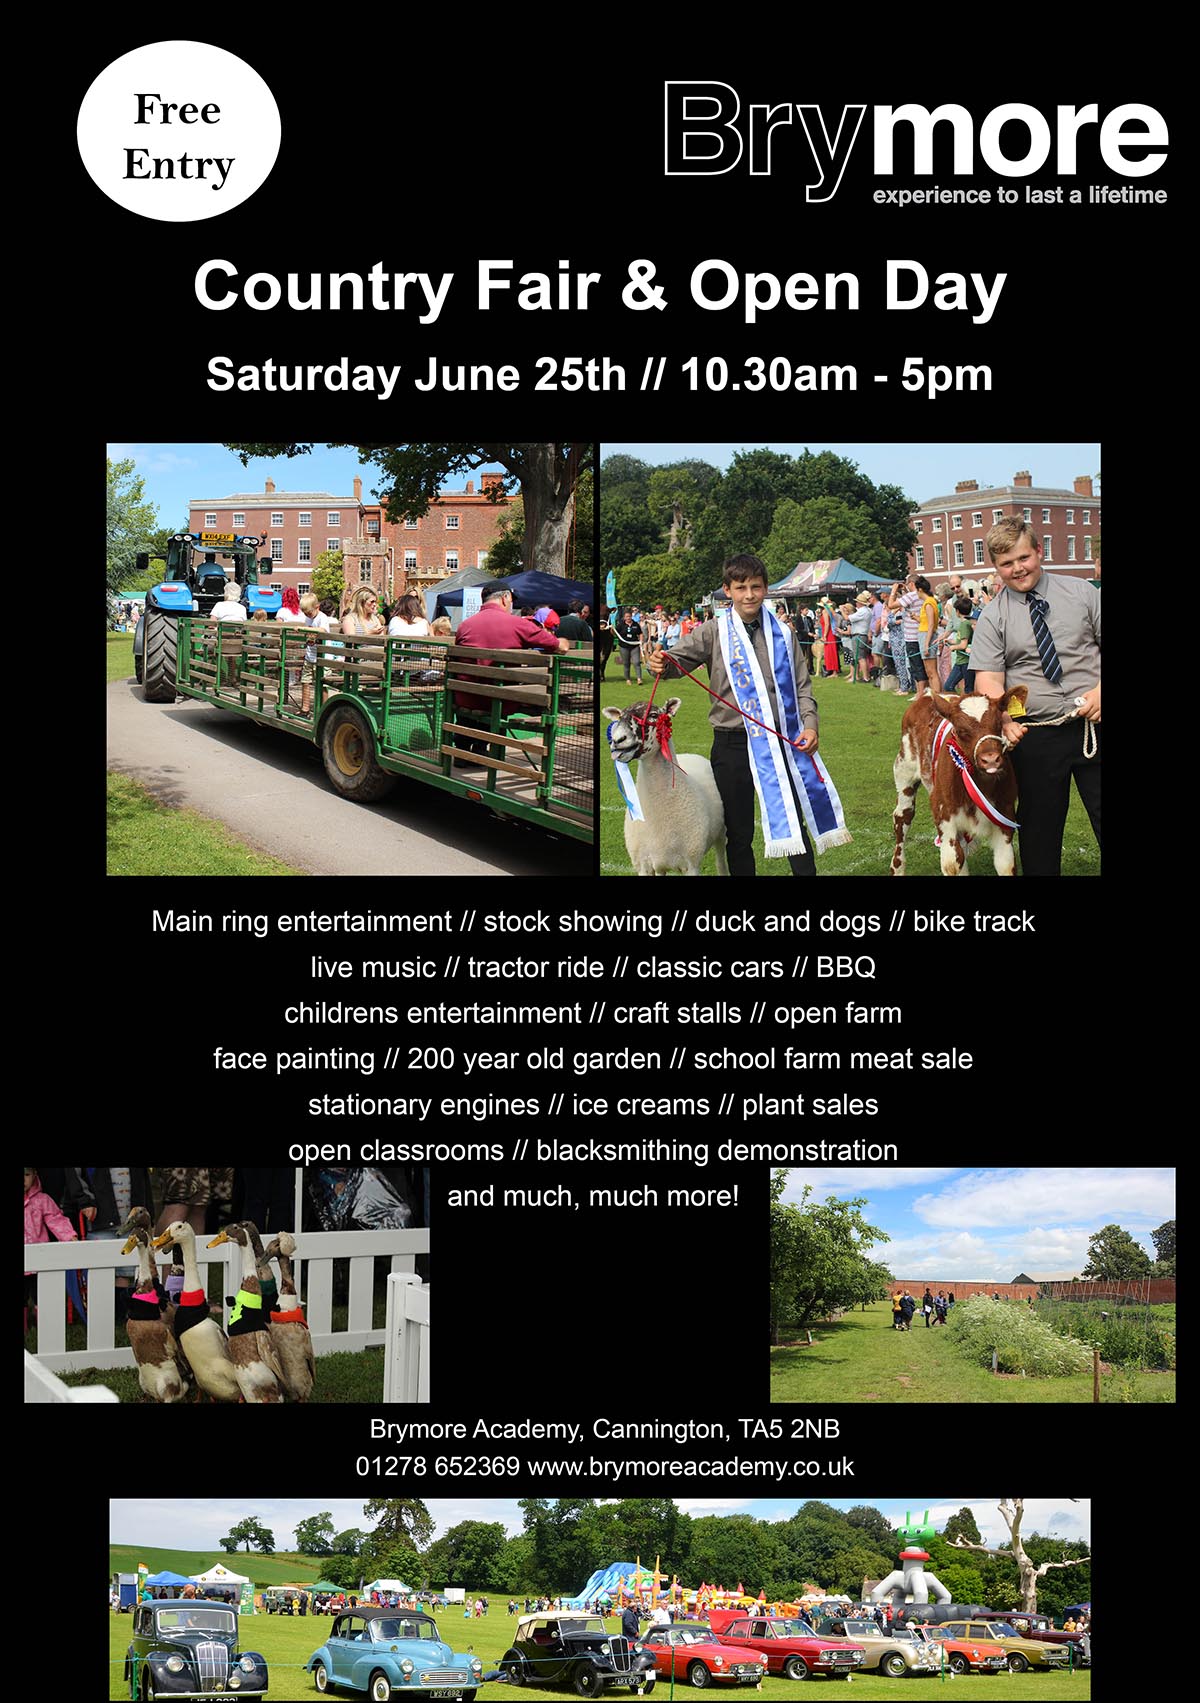 Brymore Academy - Country Fair & Open Day